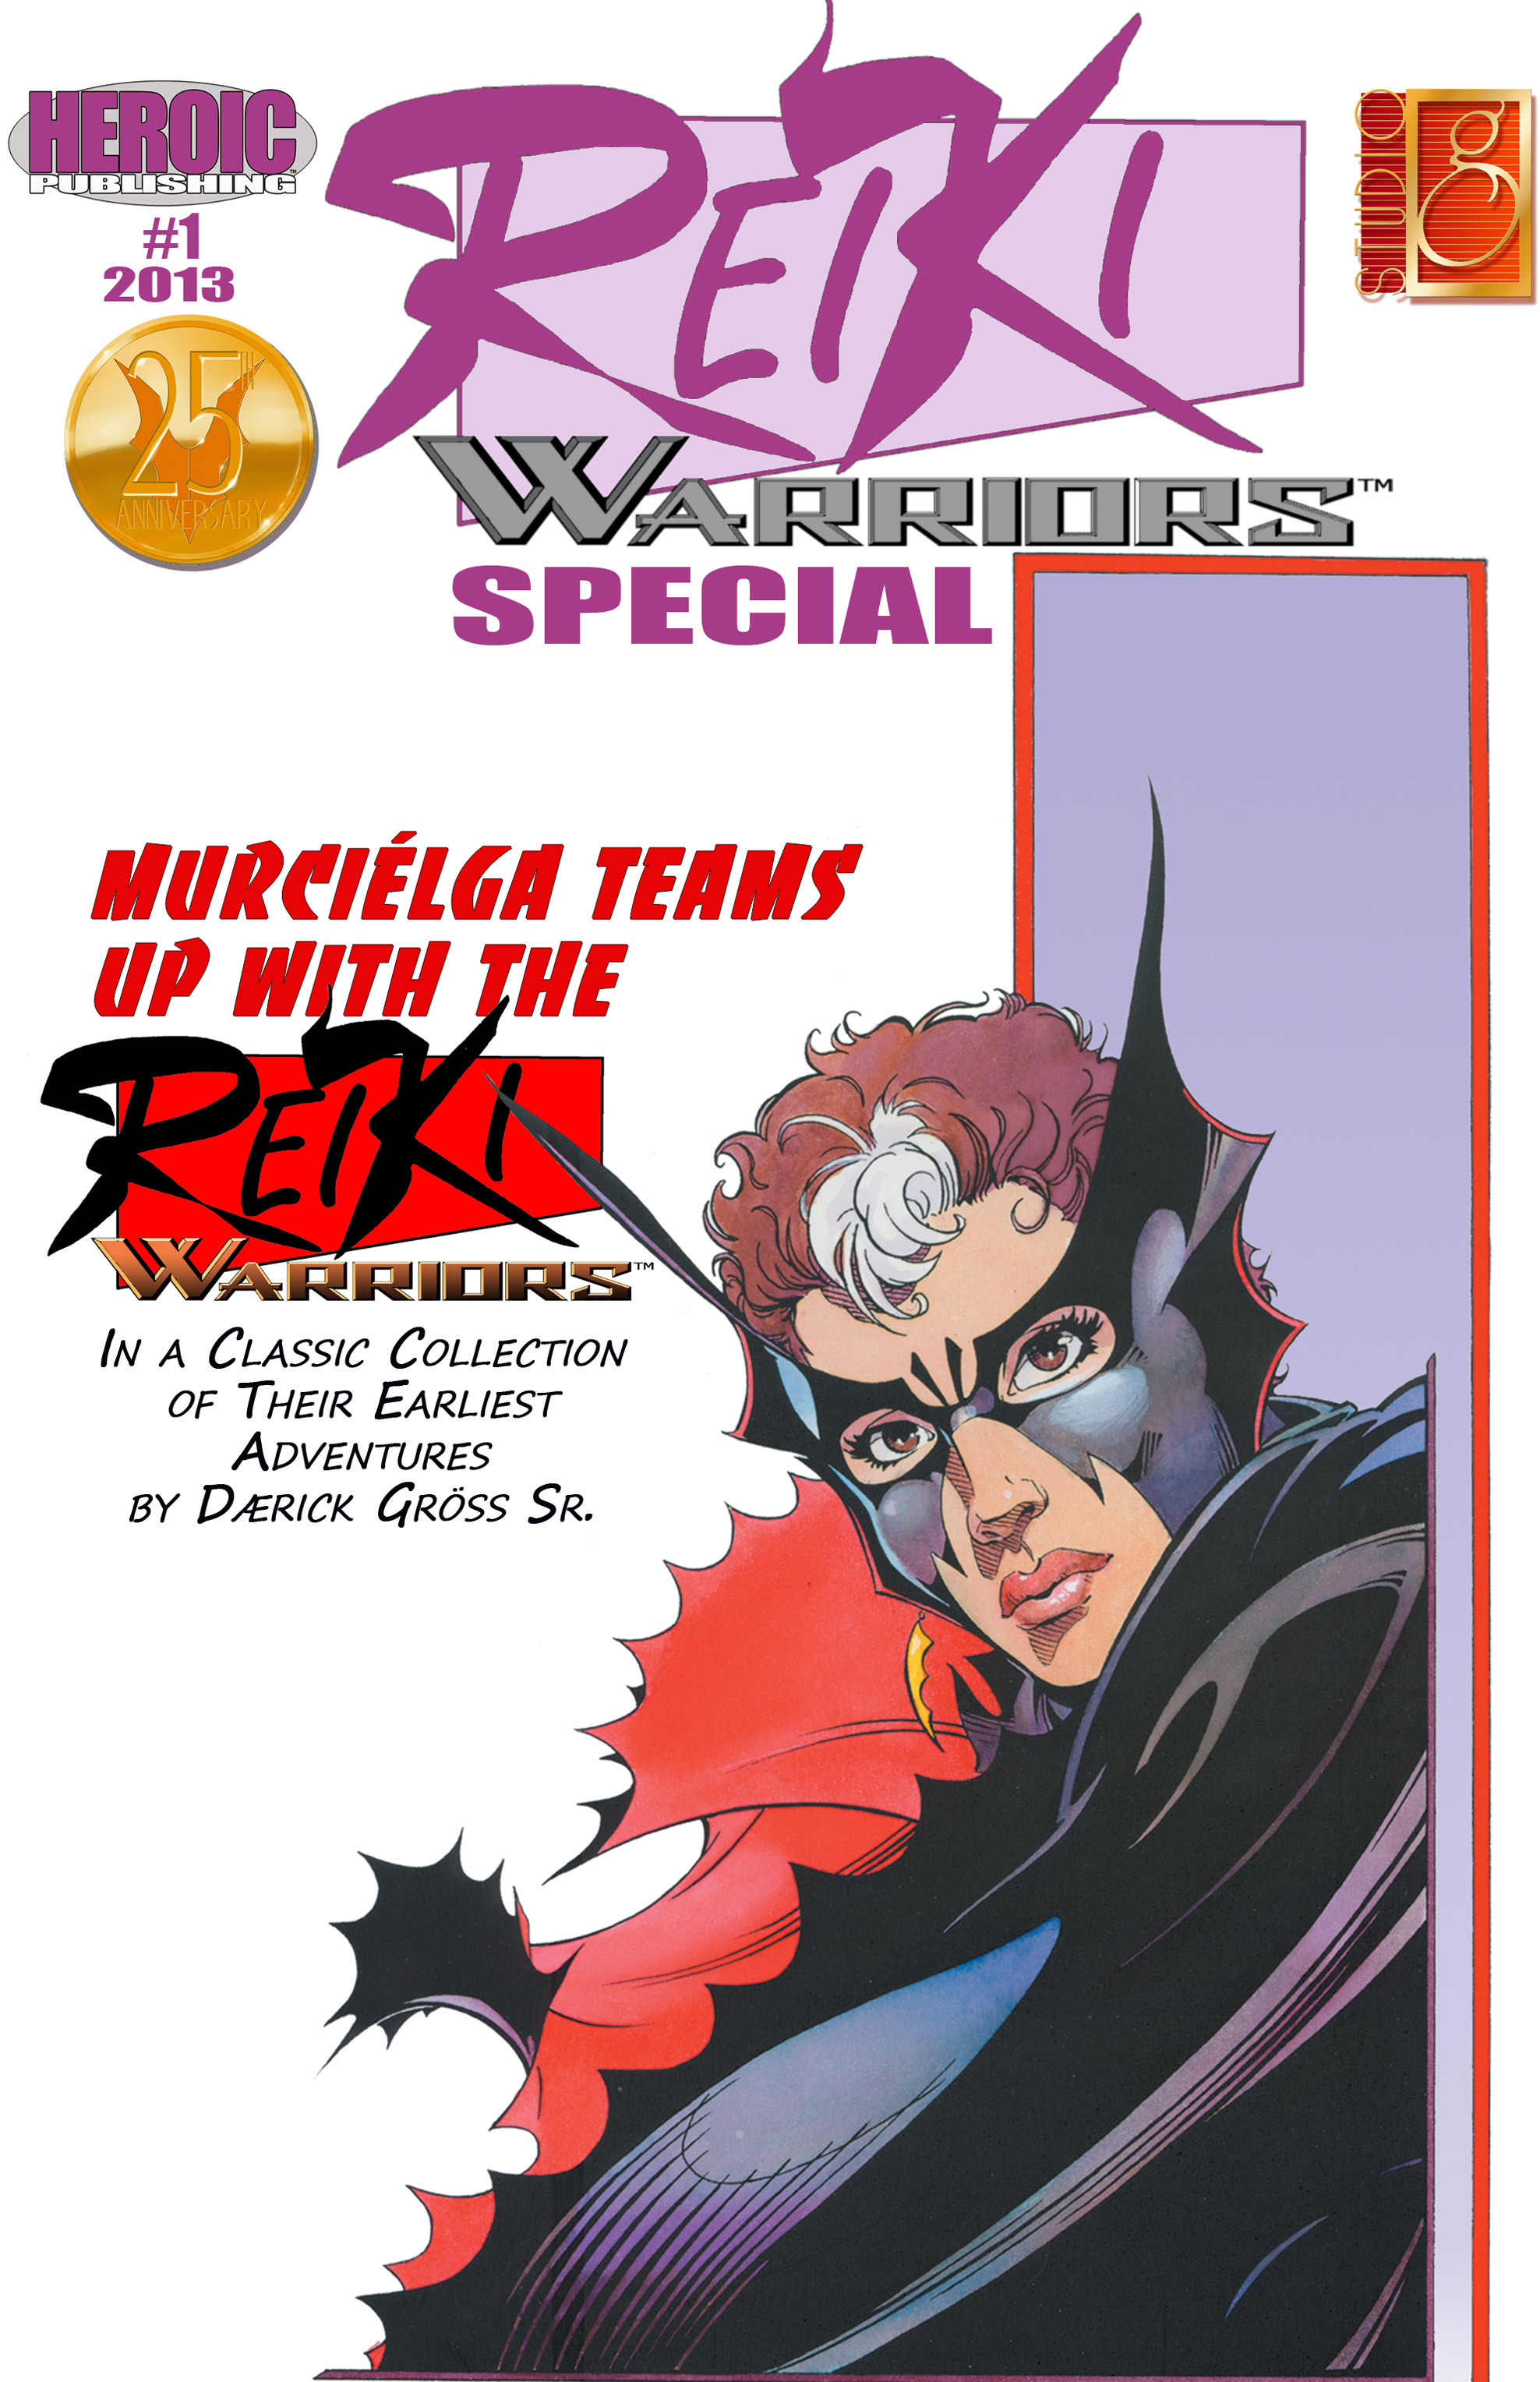 Read online Reiki Warriors Special comic -  Issue # Full - 1